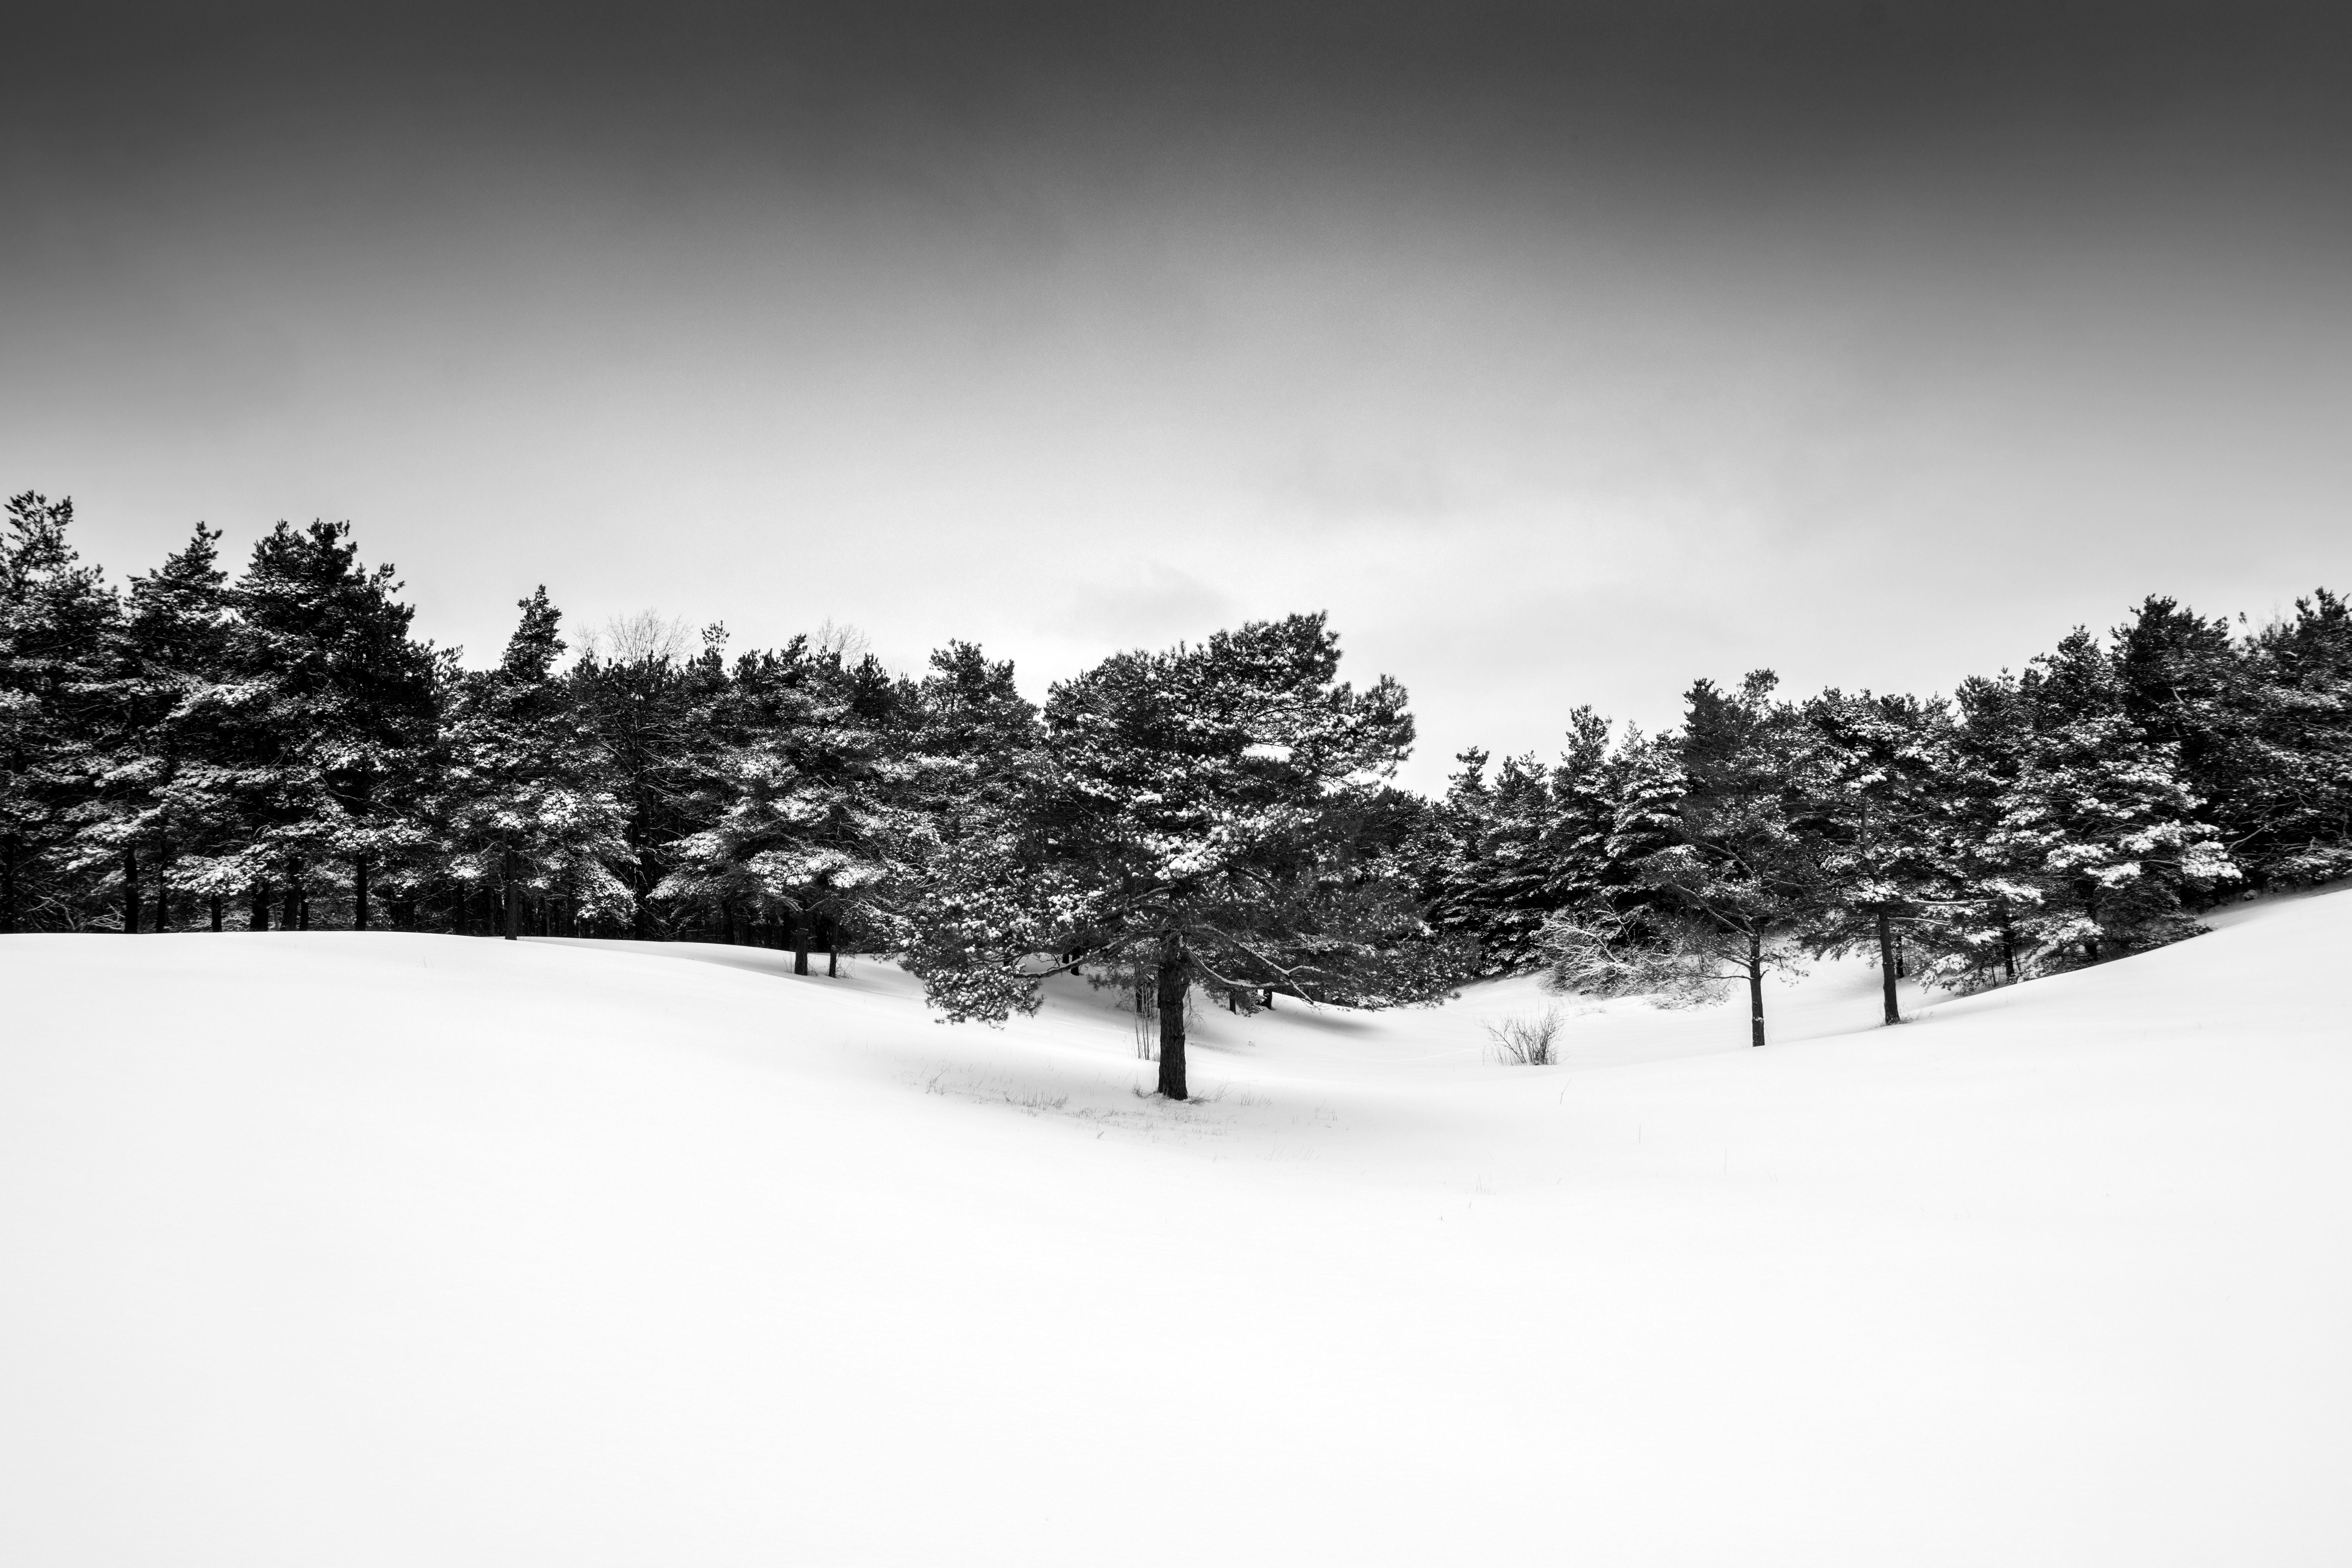 Black and White Photograph Rick Bogacz - « Line of Trees in Snowy Field », impression pigmentaire d'archives signée